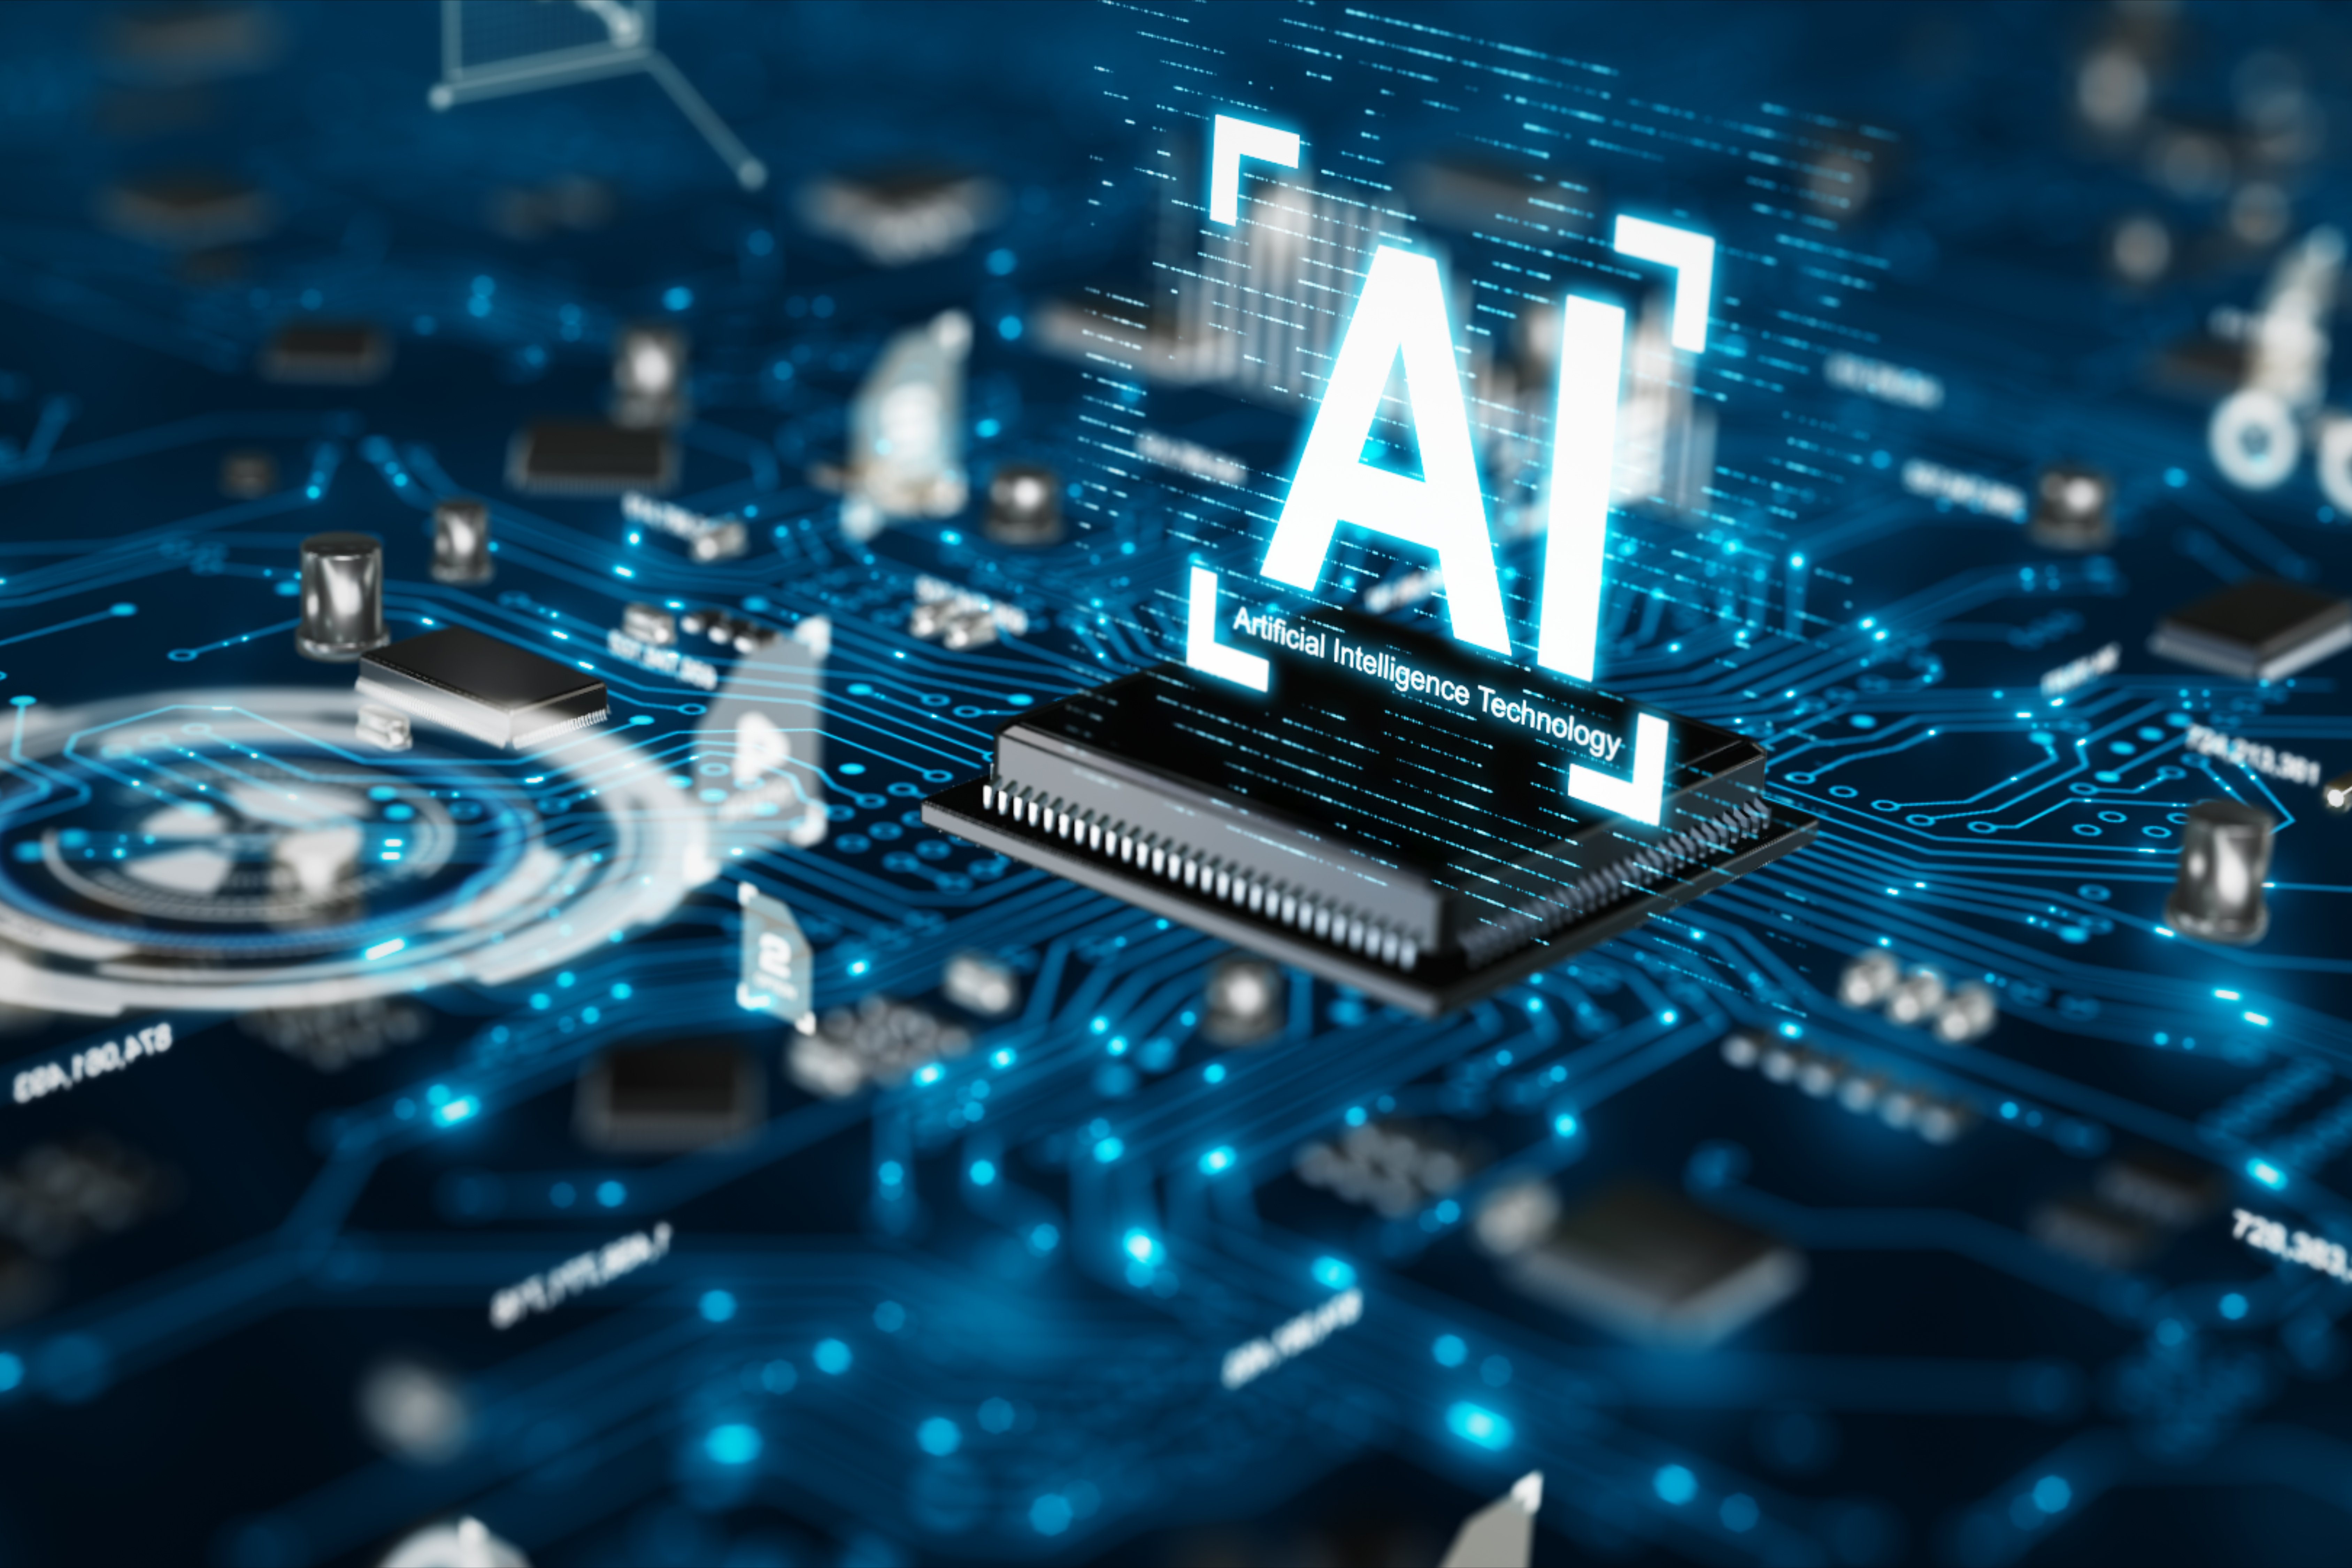 What is artificial intelligence (AI)?